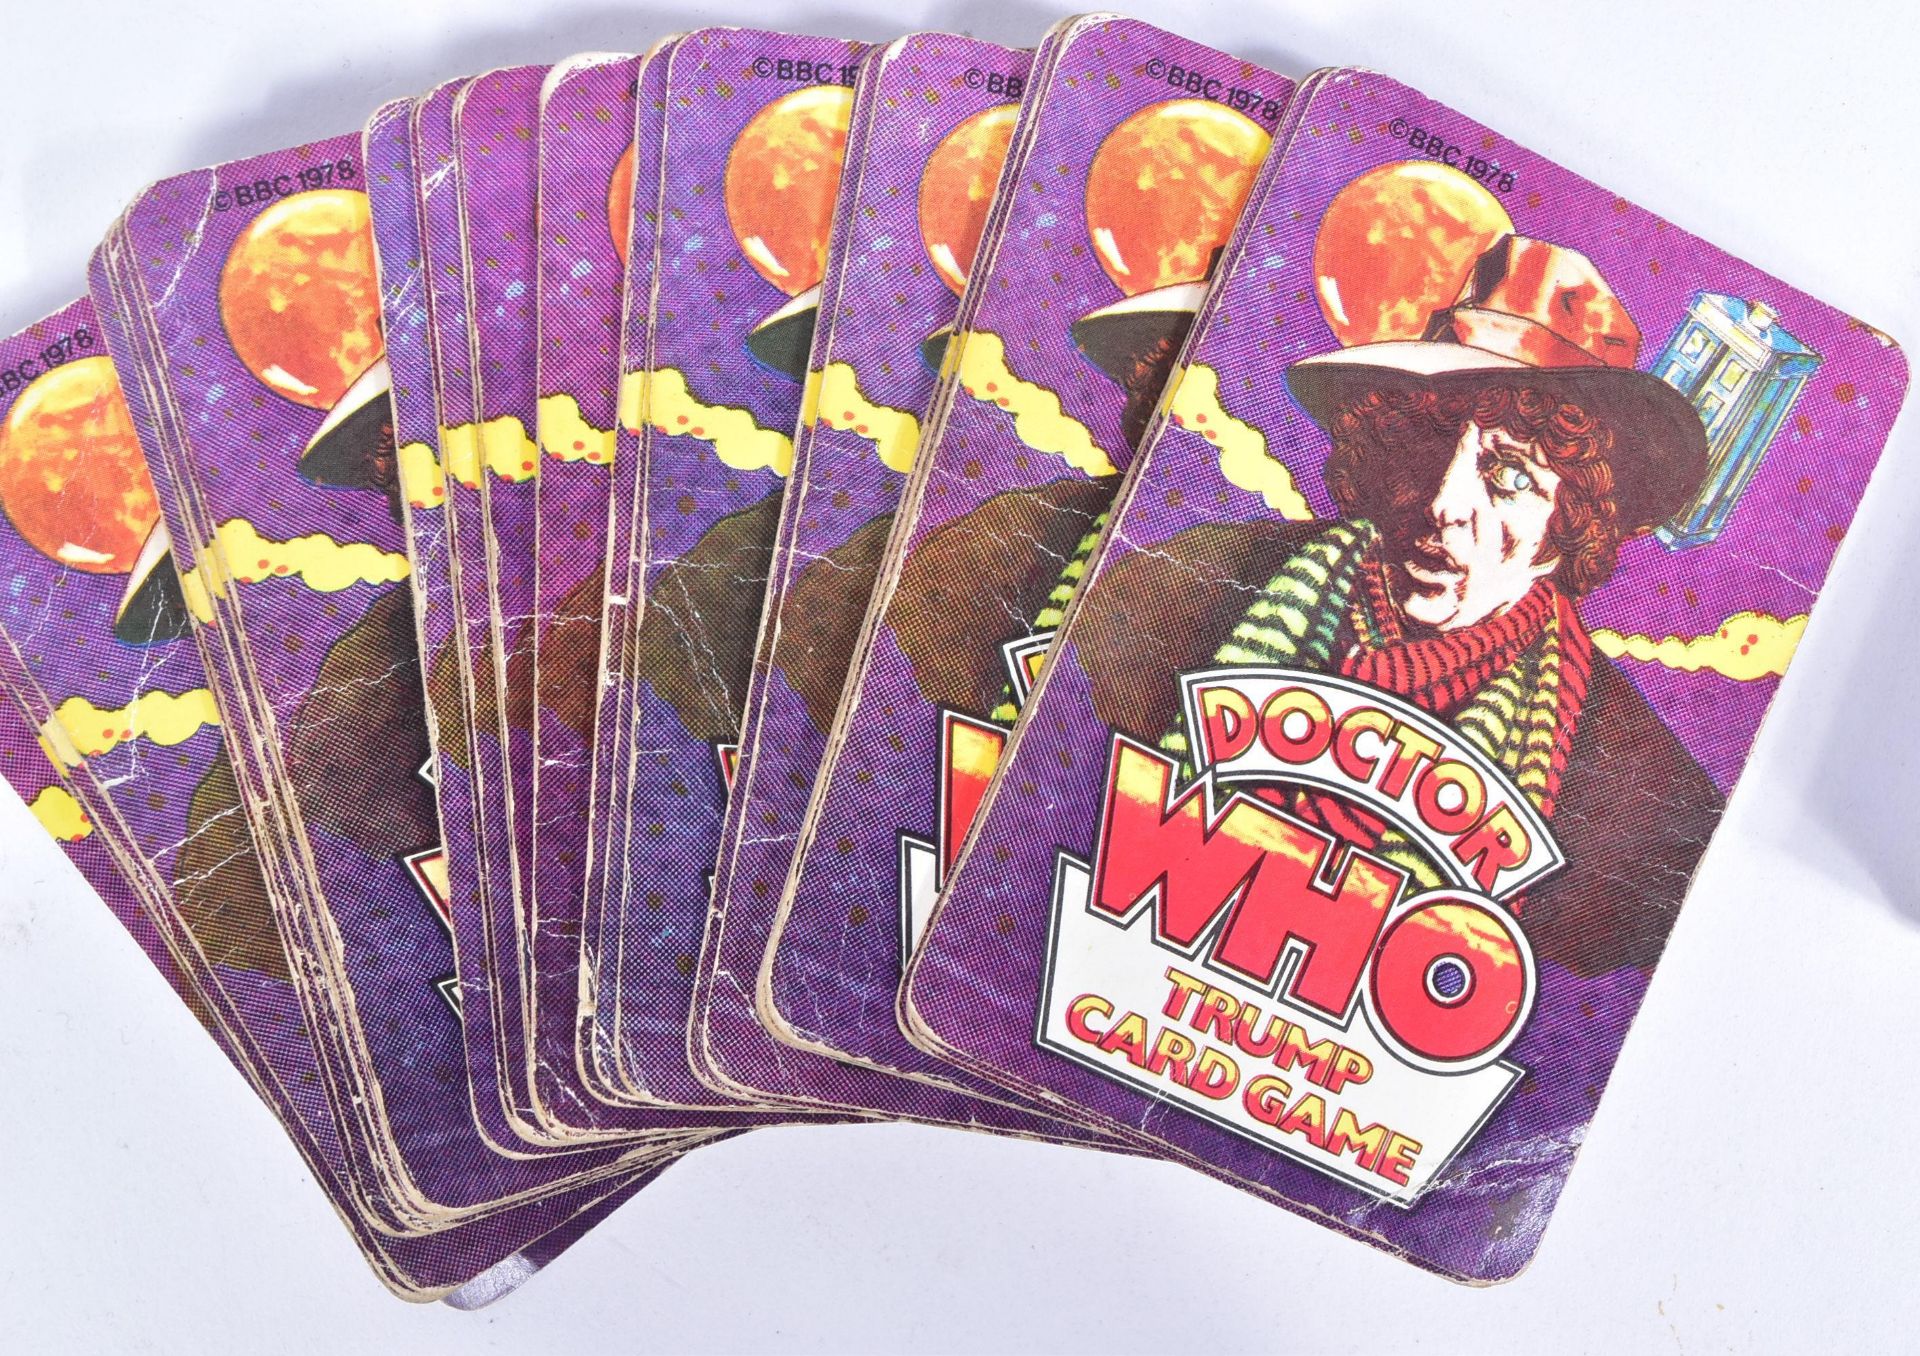 DOCTOR WHO - VINTAGE TRUMP CARD GAME & FIRST ADVENTURE - Image 2 of 6